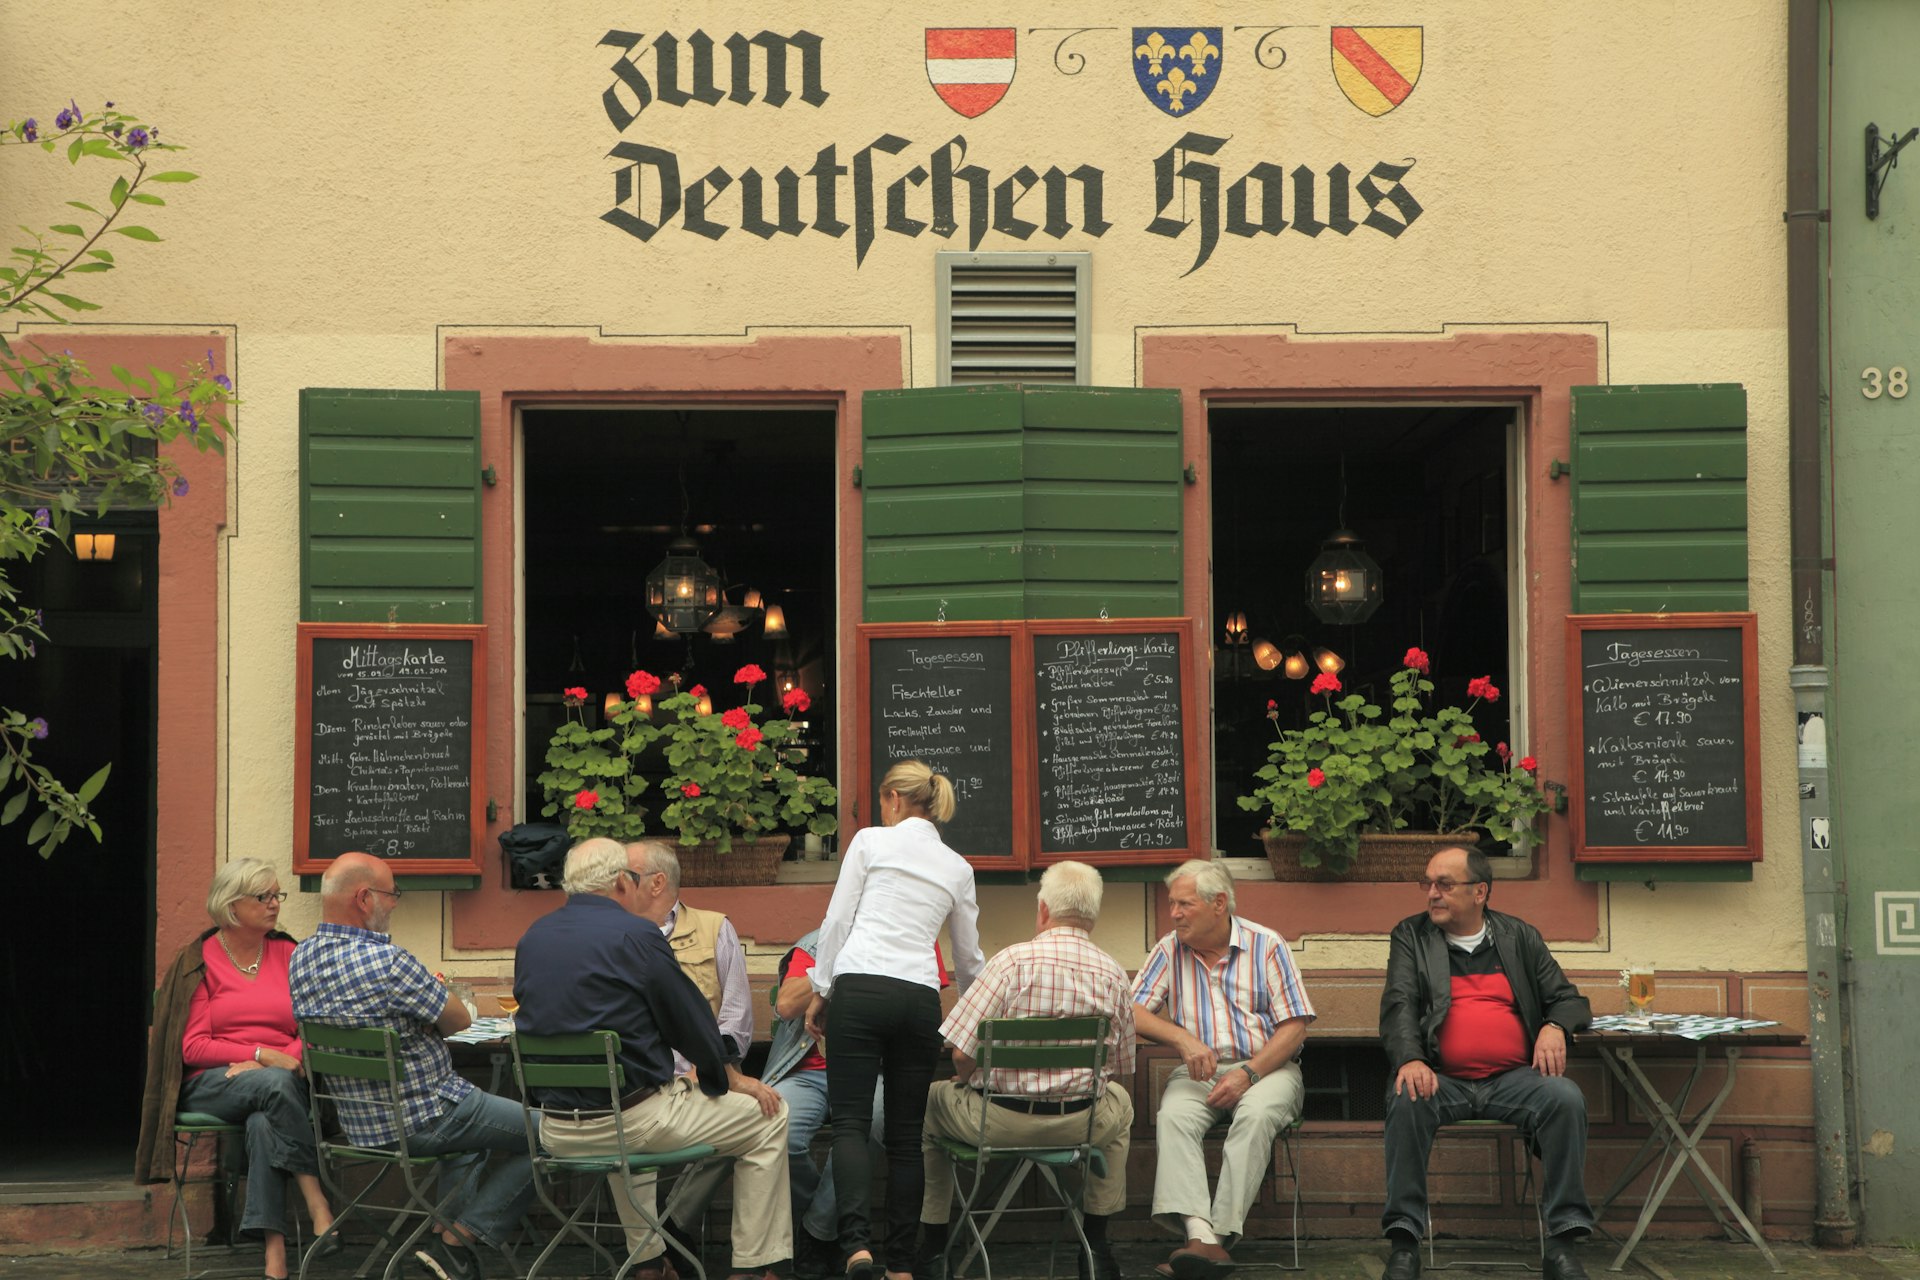 Patrons seated outside a traditional German restaurant with a sign reading 'Zum Deutschen Haus', menus displayed on a blackboard, and an exterior adorned with flowers.